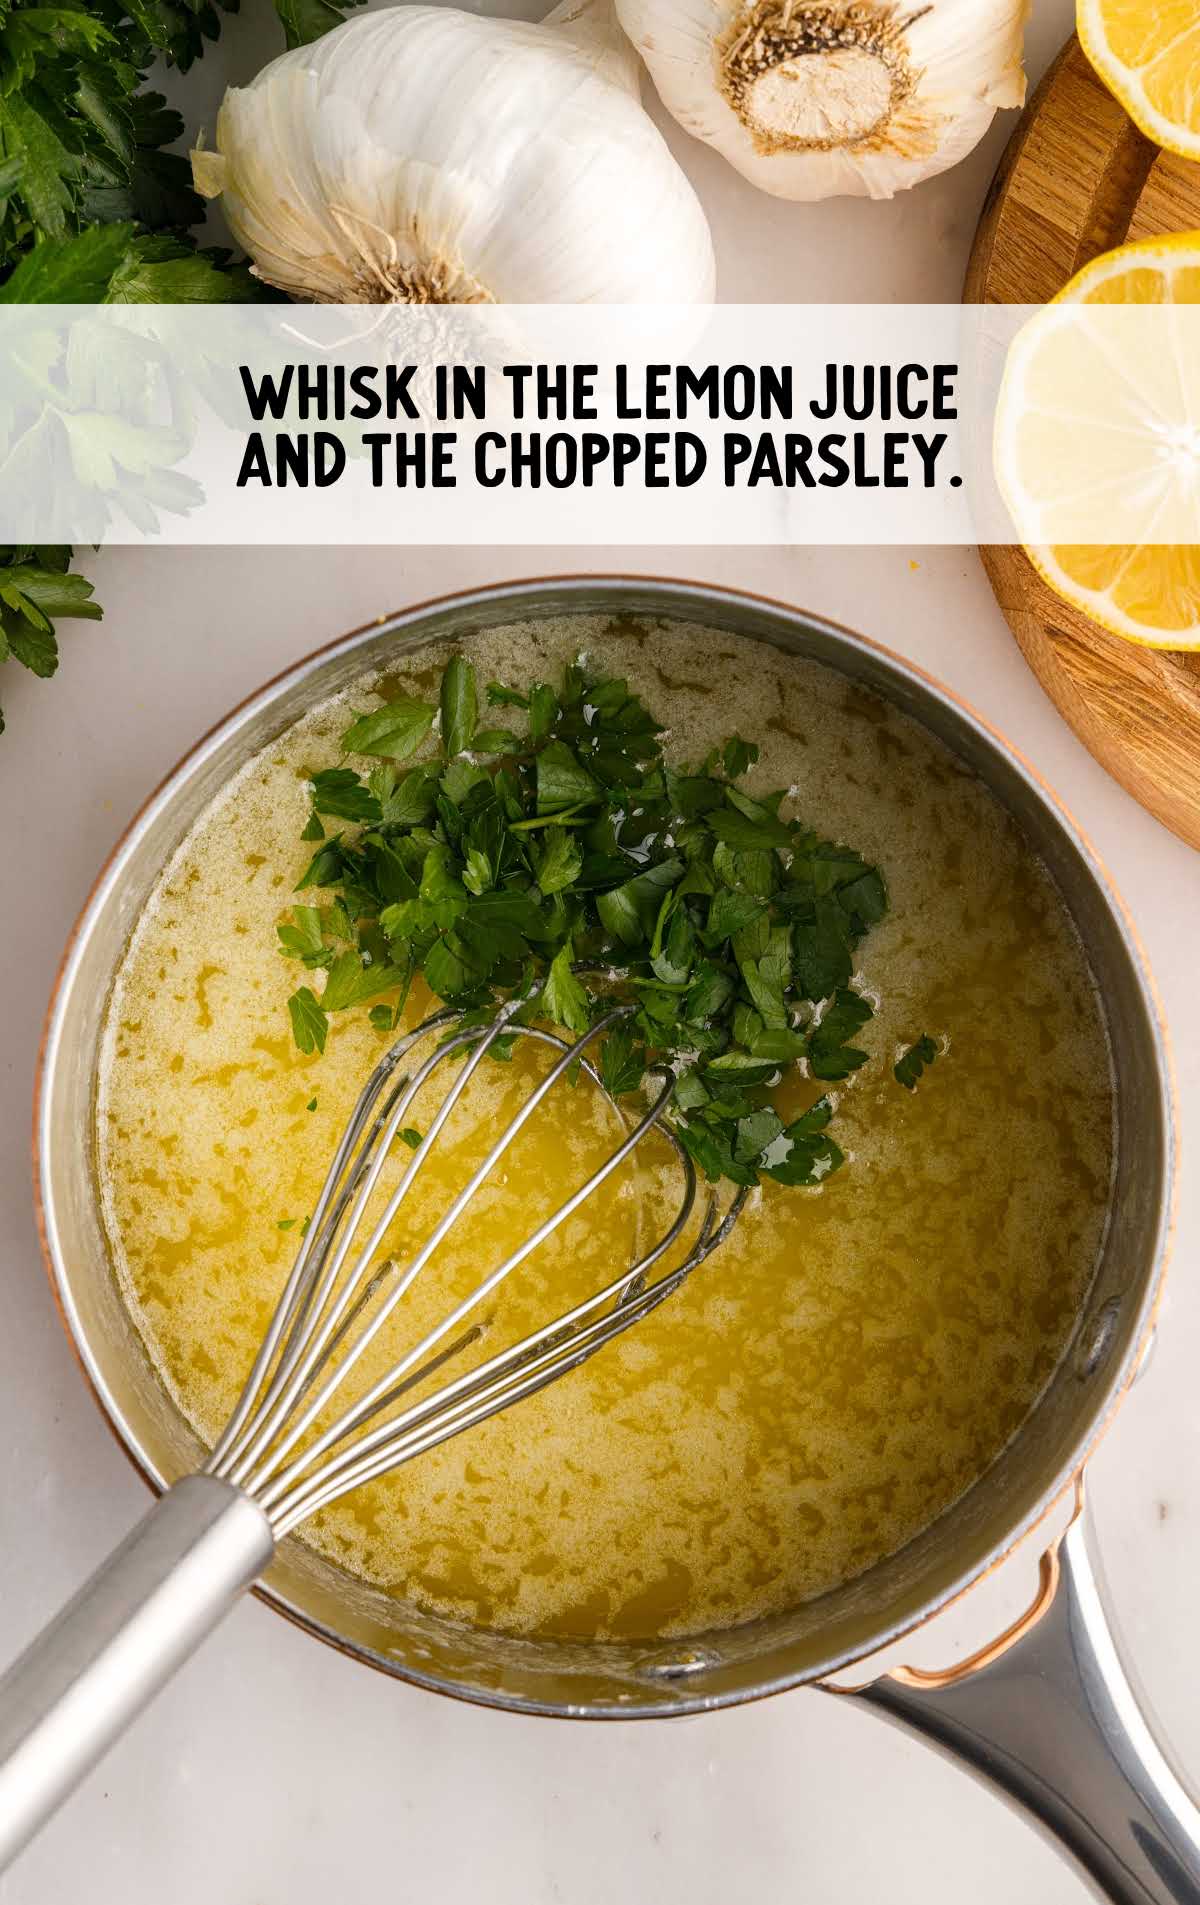 lemon juice and chopped parsley whisked in the garlic mixture in spot